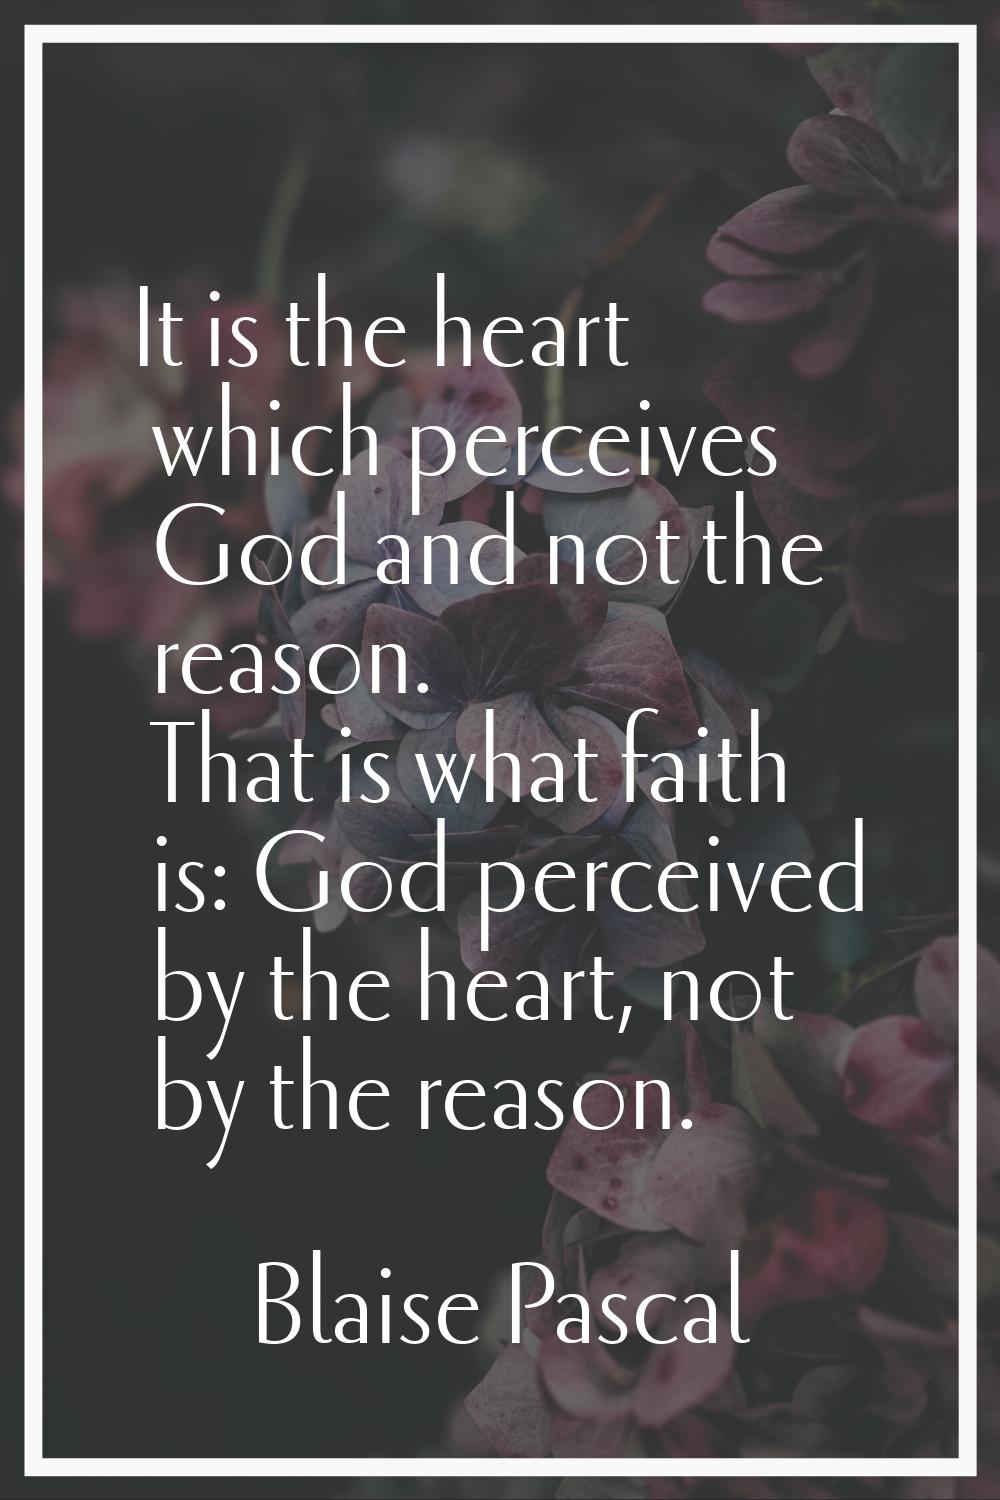 It is the heart which perceives God and not the reason. That is what faith is: God perceived by the